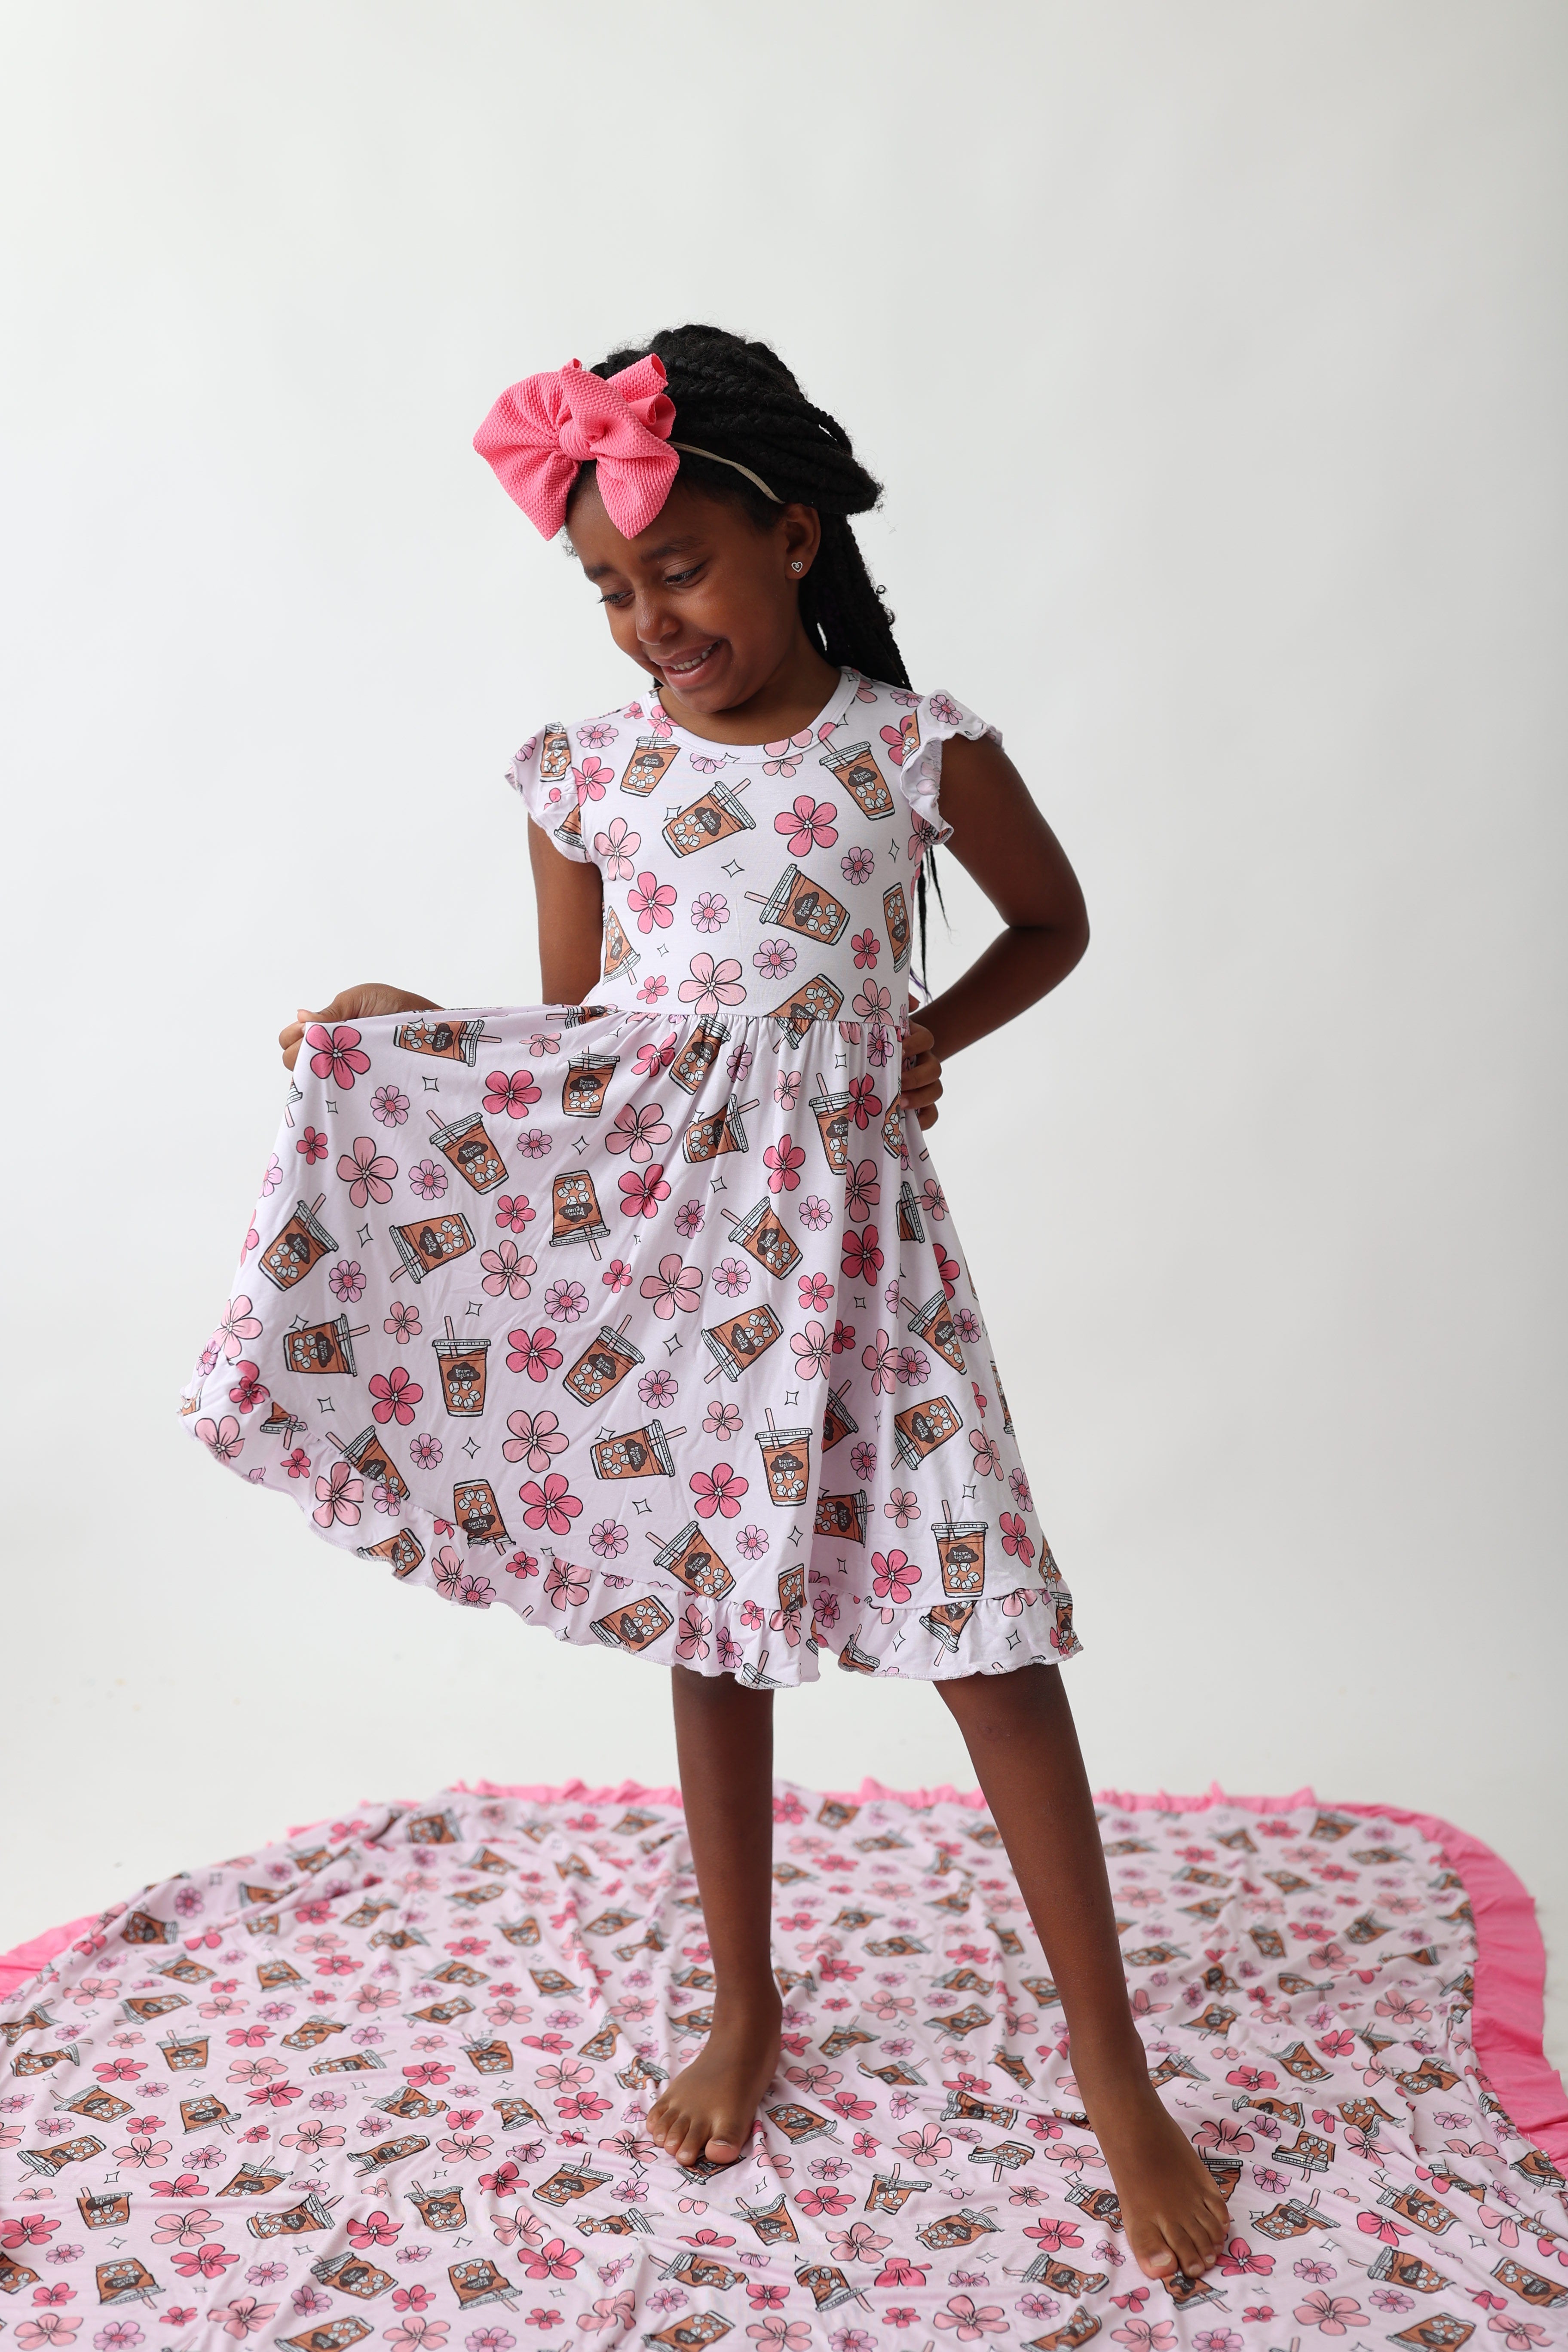 Exclusive A Cup Of Dreams Dream Ruffle Dress